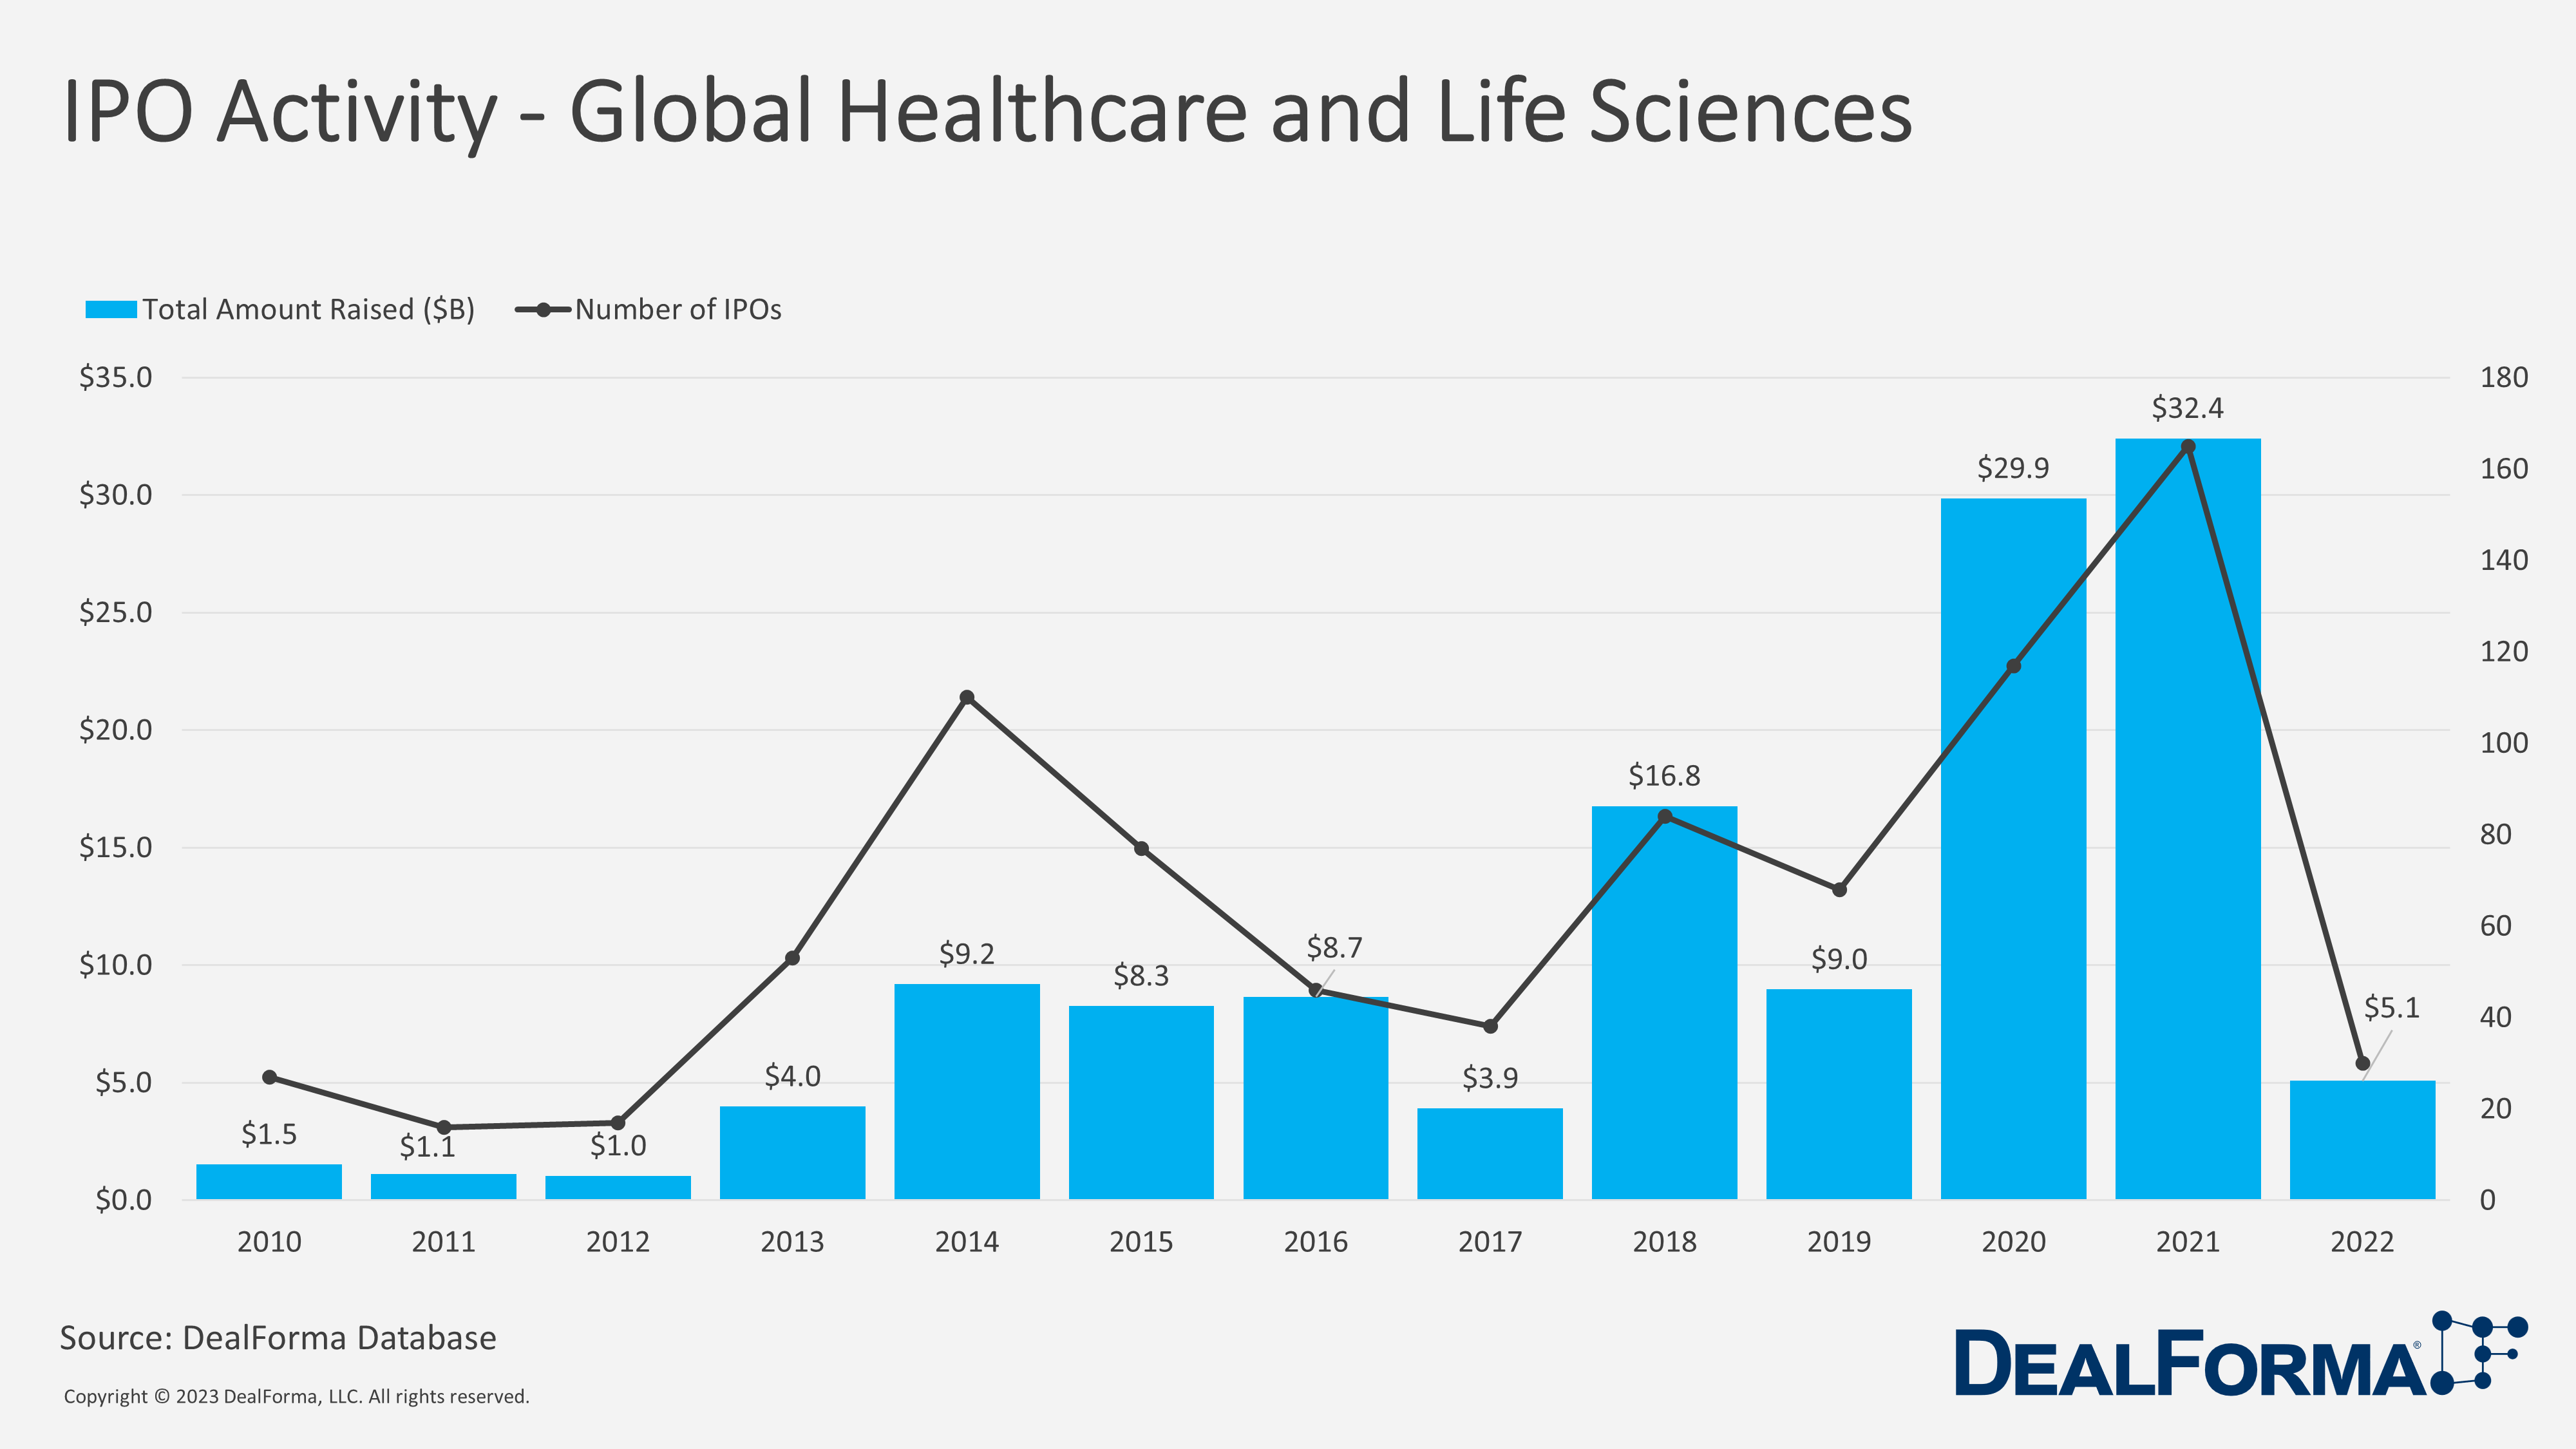 IPO Activity - Global Healthcare and Life Sciences